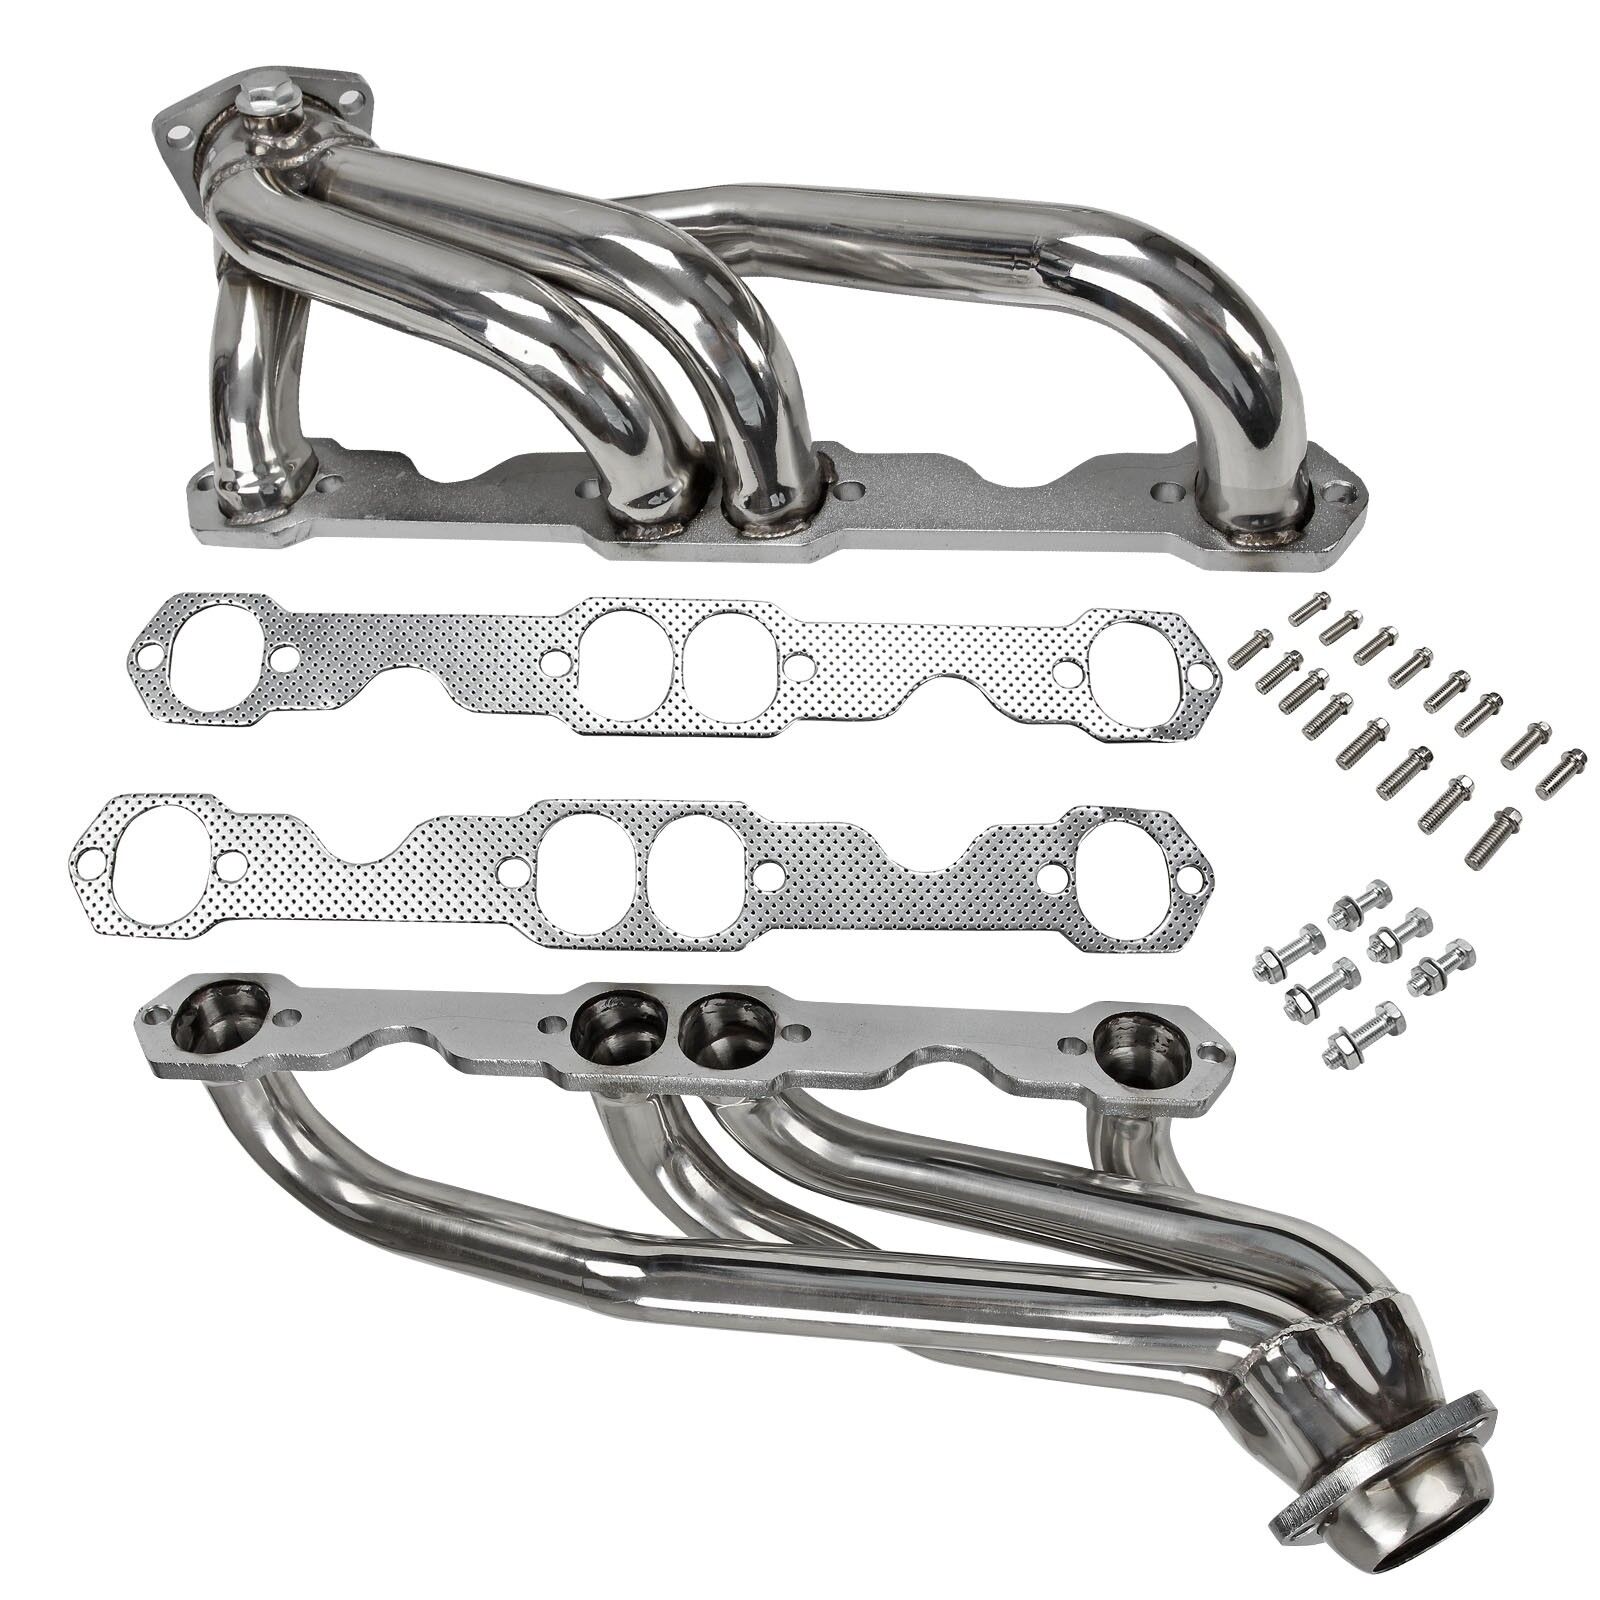 Stainless Steel Headers Truck w/ Gaskets Fits Chevy GMC 88-97 5.0L 305 350 V8